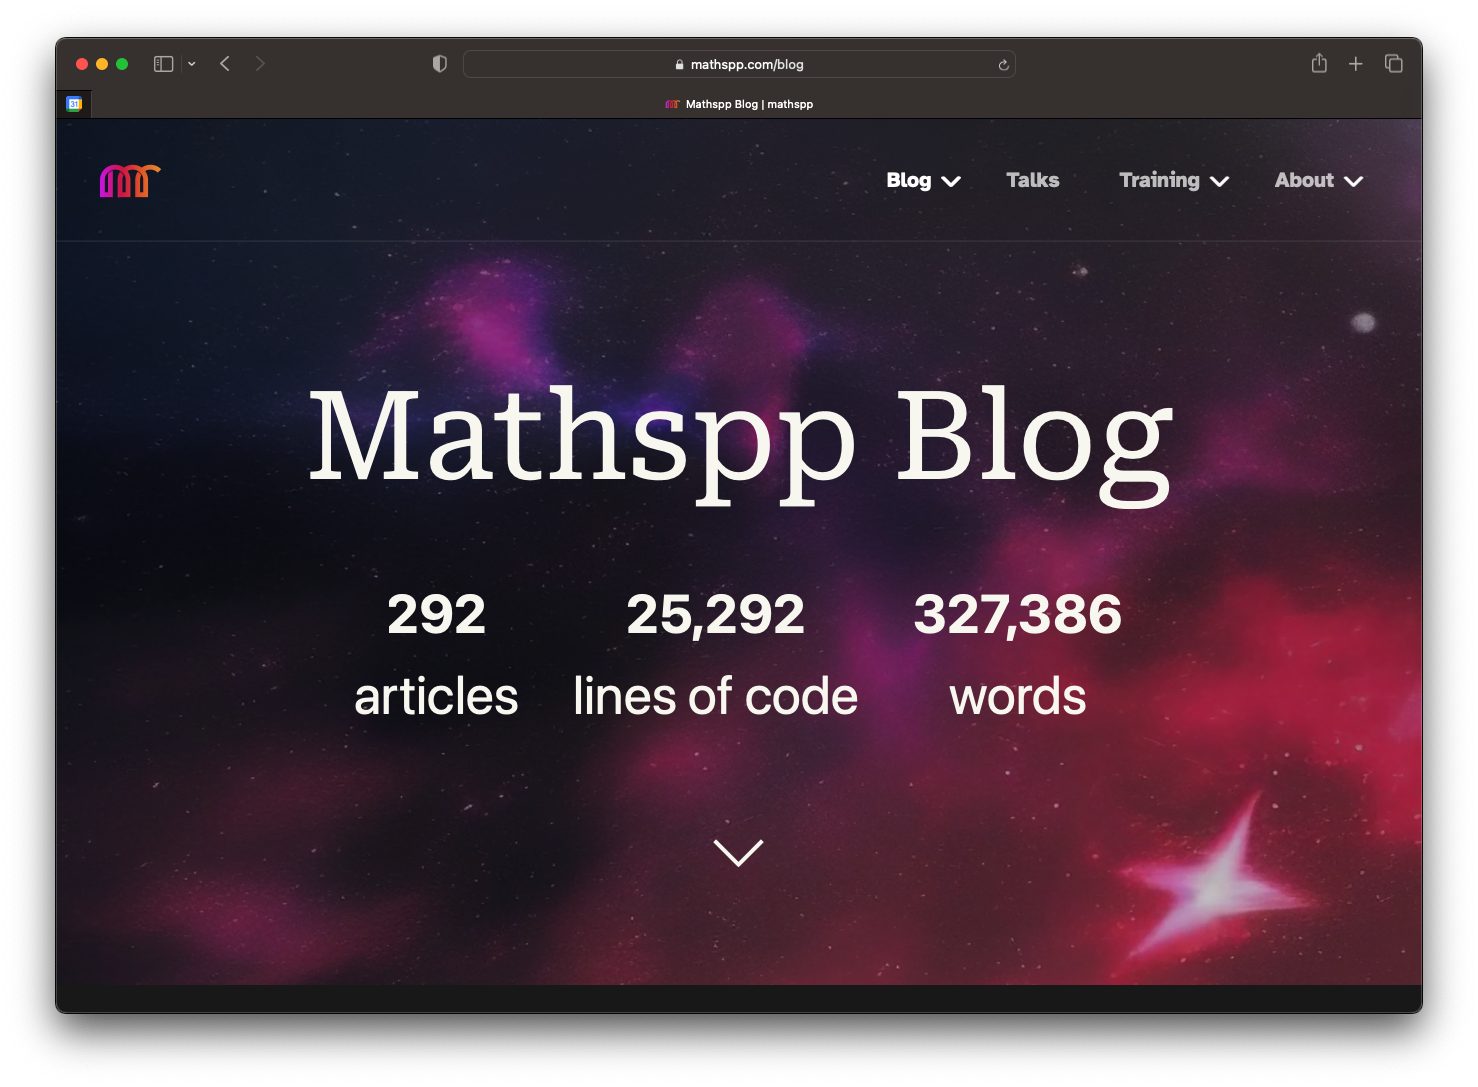 Screenshot of my blog page where it shows three stats – total number of articles, lines of code written, and words.